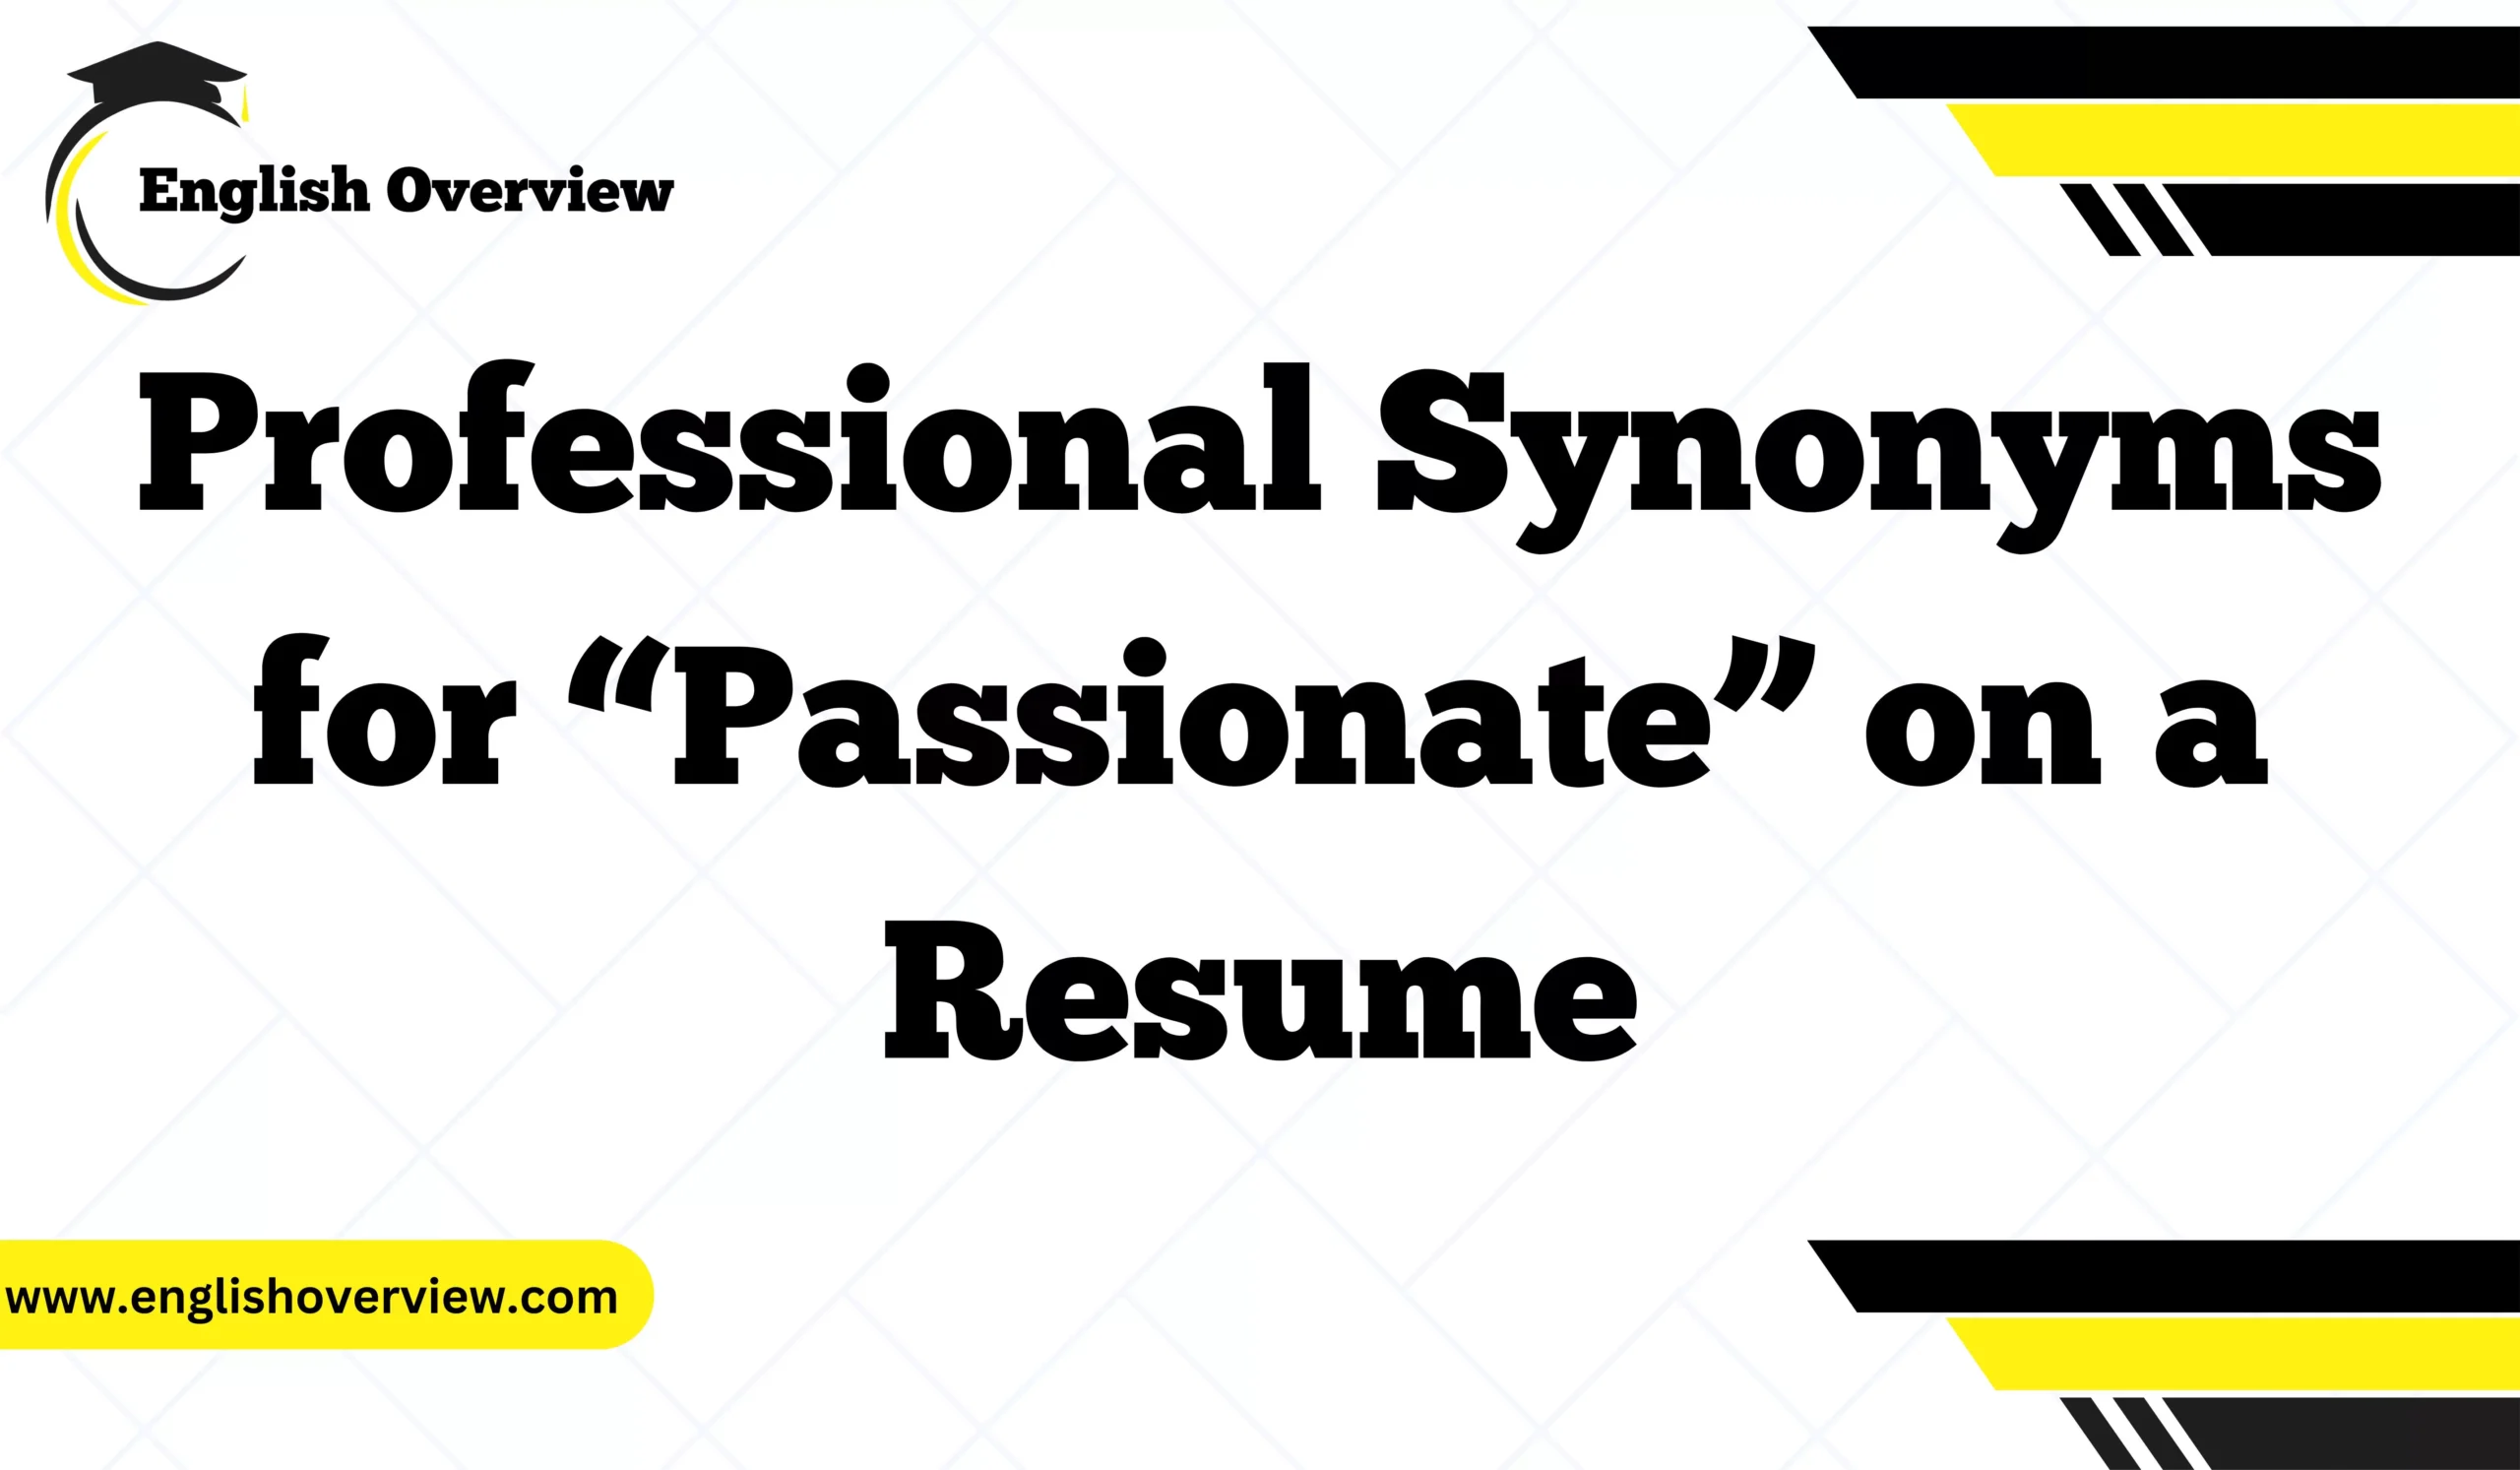 20 Professional Synonyms for “Passionate” on a Resume